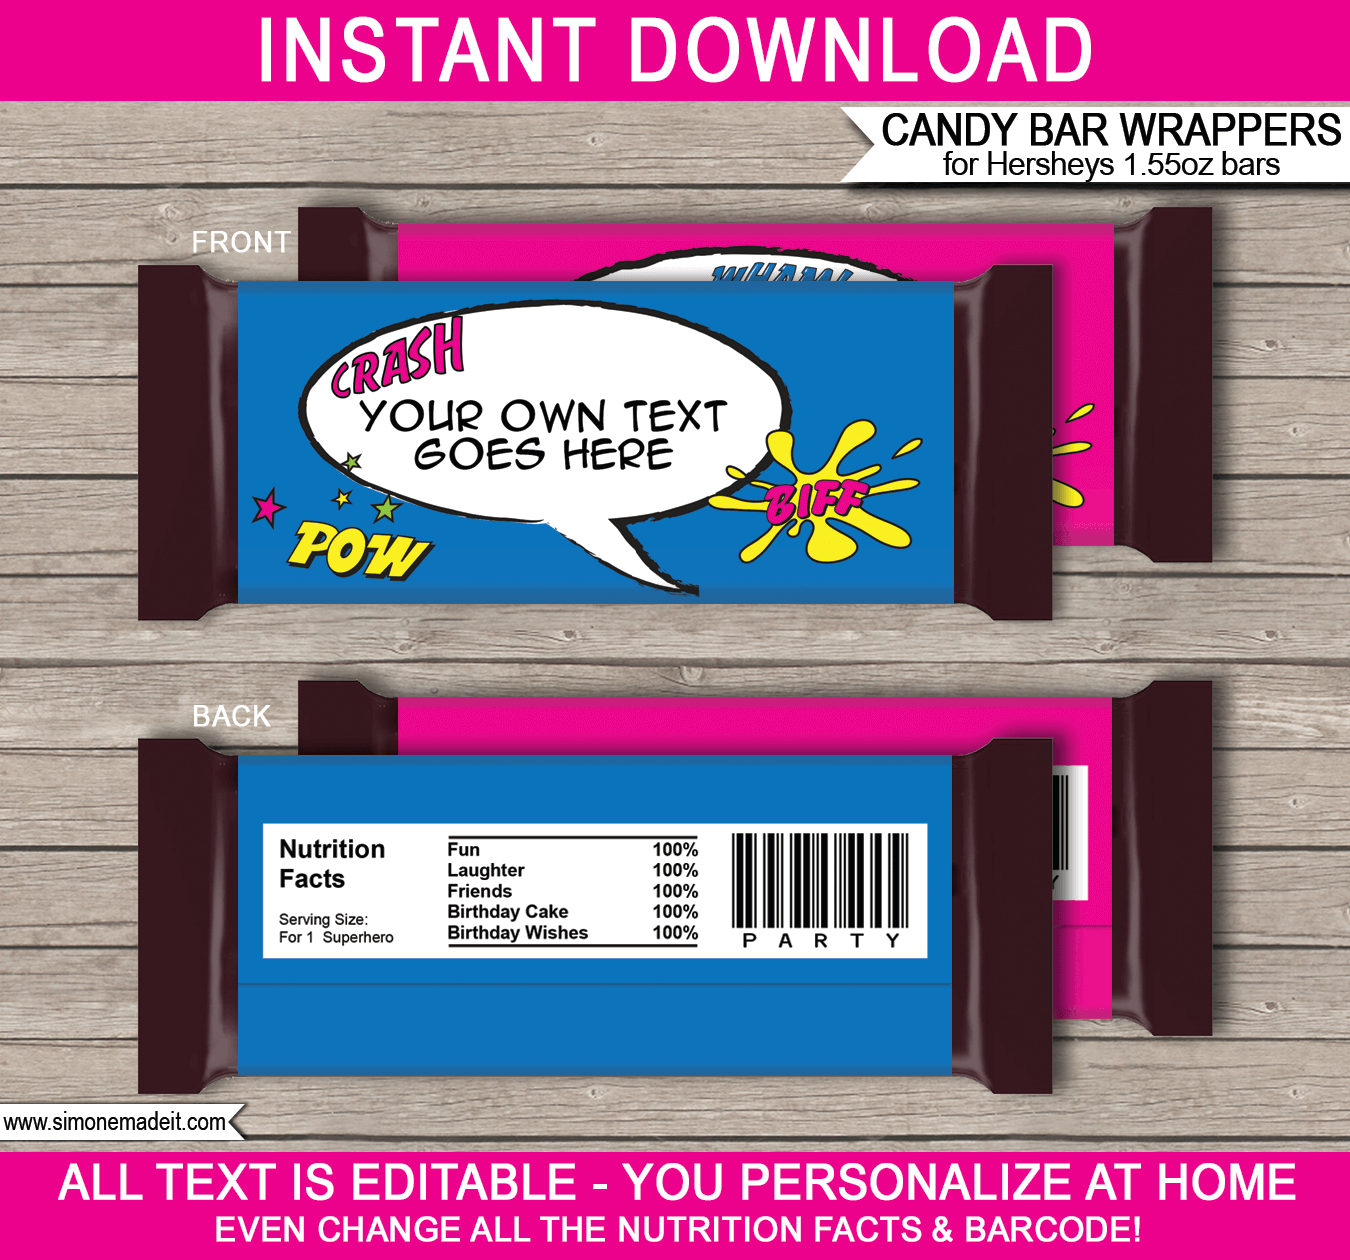 Printable Supergirl Hershey Candy Bar Wrappers Template | Blue Pink Yellow | Birthday Party Favors, Teachers Day, Valentine's Day | Personalized Candy Bars | Editable Template | INSTANT DOWNLOAD $3.00 via simonemadeit.com